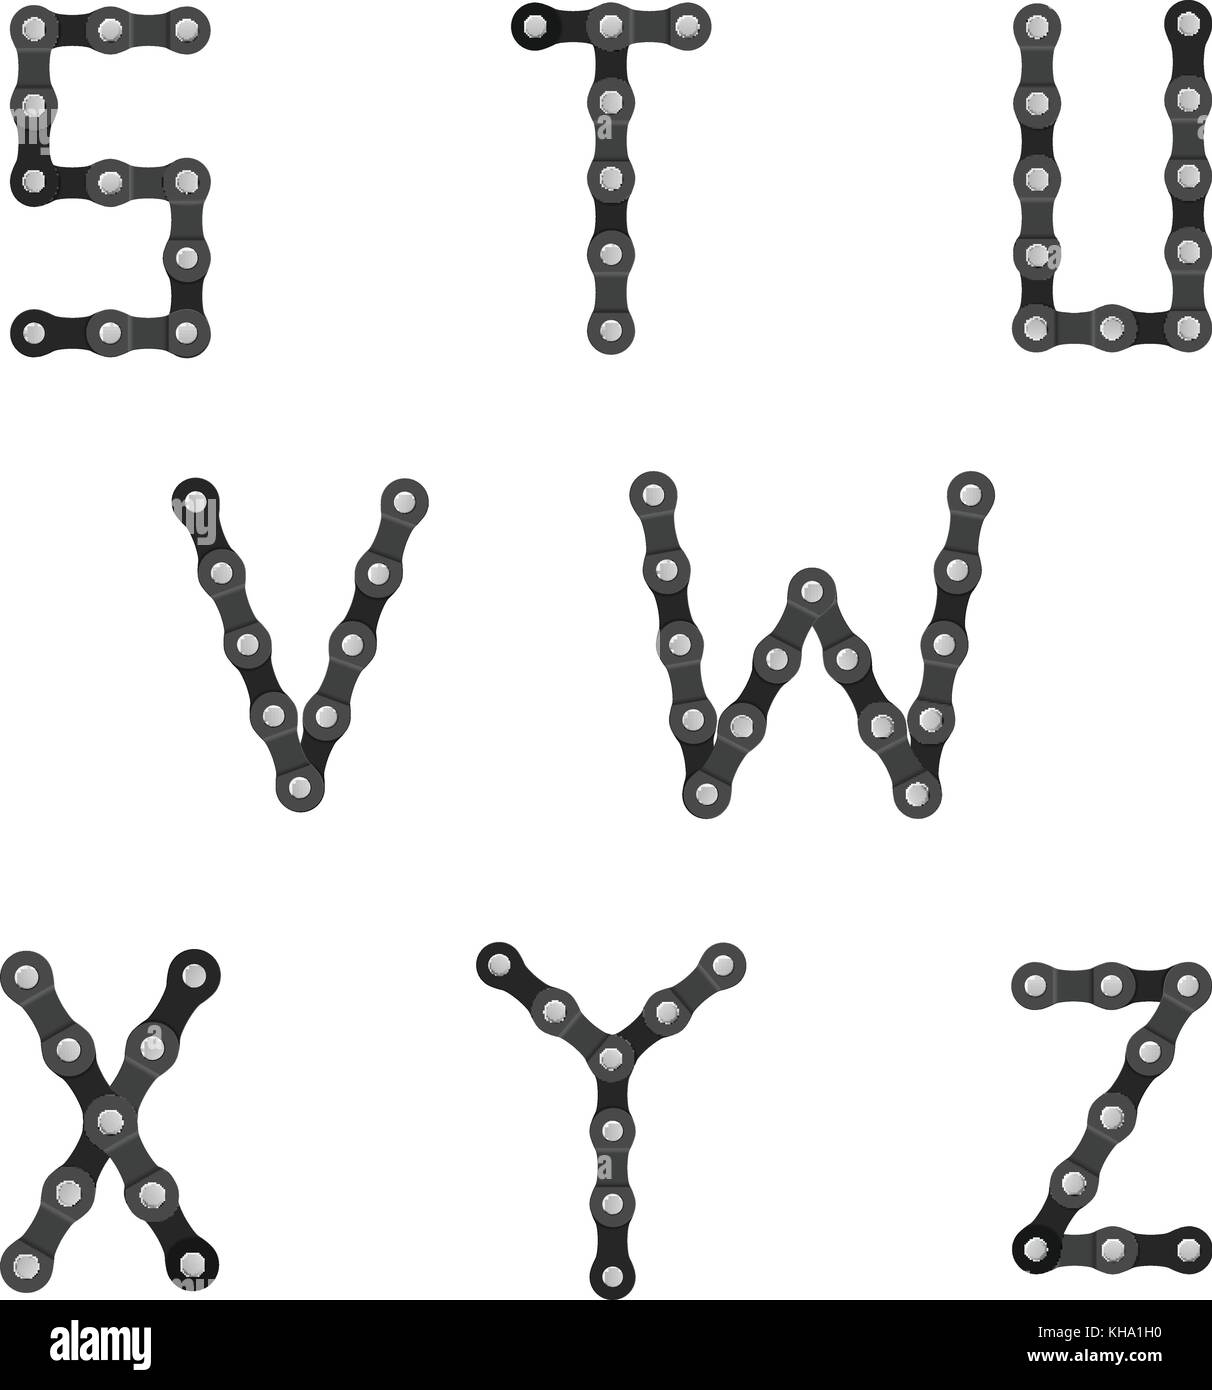 Bike chain alphabet S to Z on a white background. Stock Vector